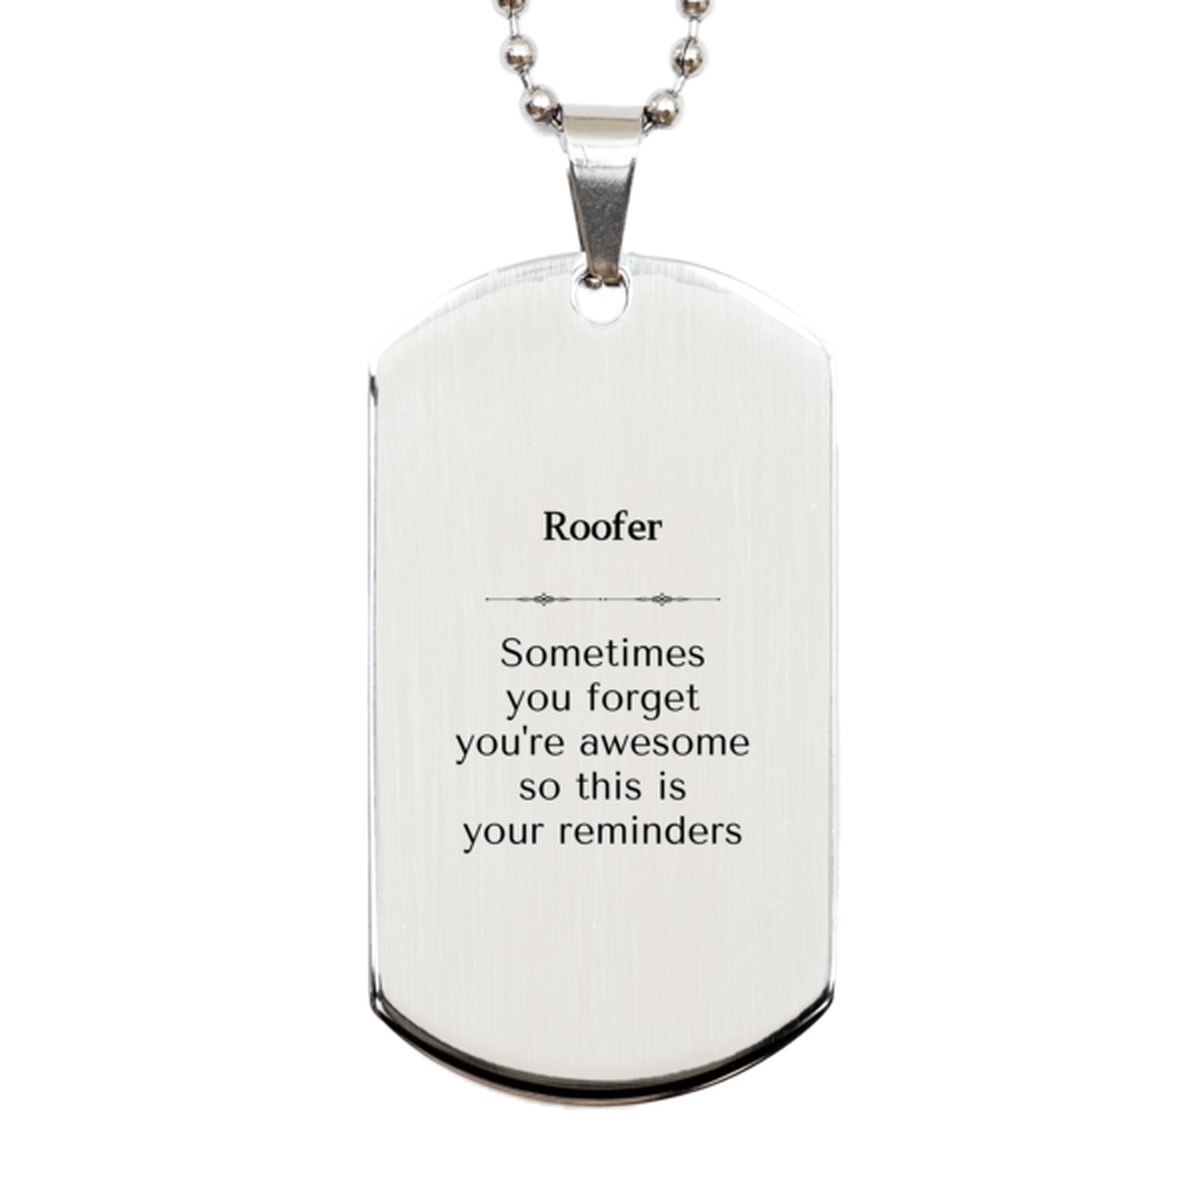 Sentimental Roofer Silver Dog Tag, Roofer Sometimes you forget you're awesome so this is your reminders, Graduation Christmas Birthday Gifts for Roofer, Men, Women, Coworkers